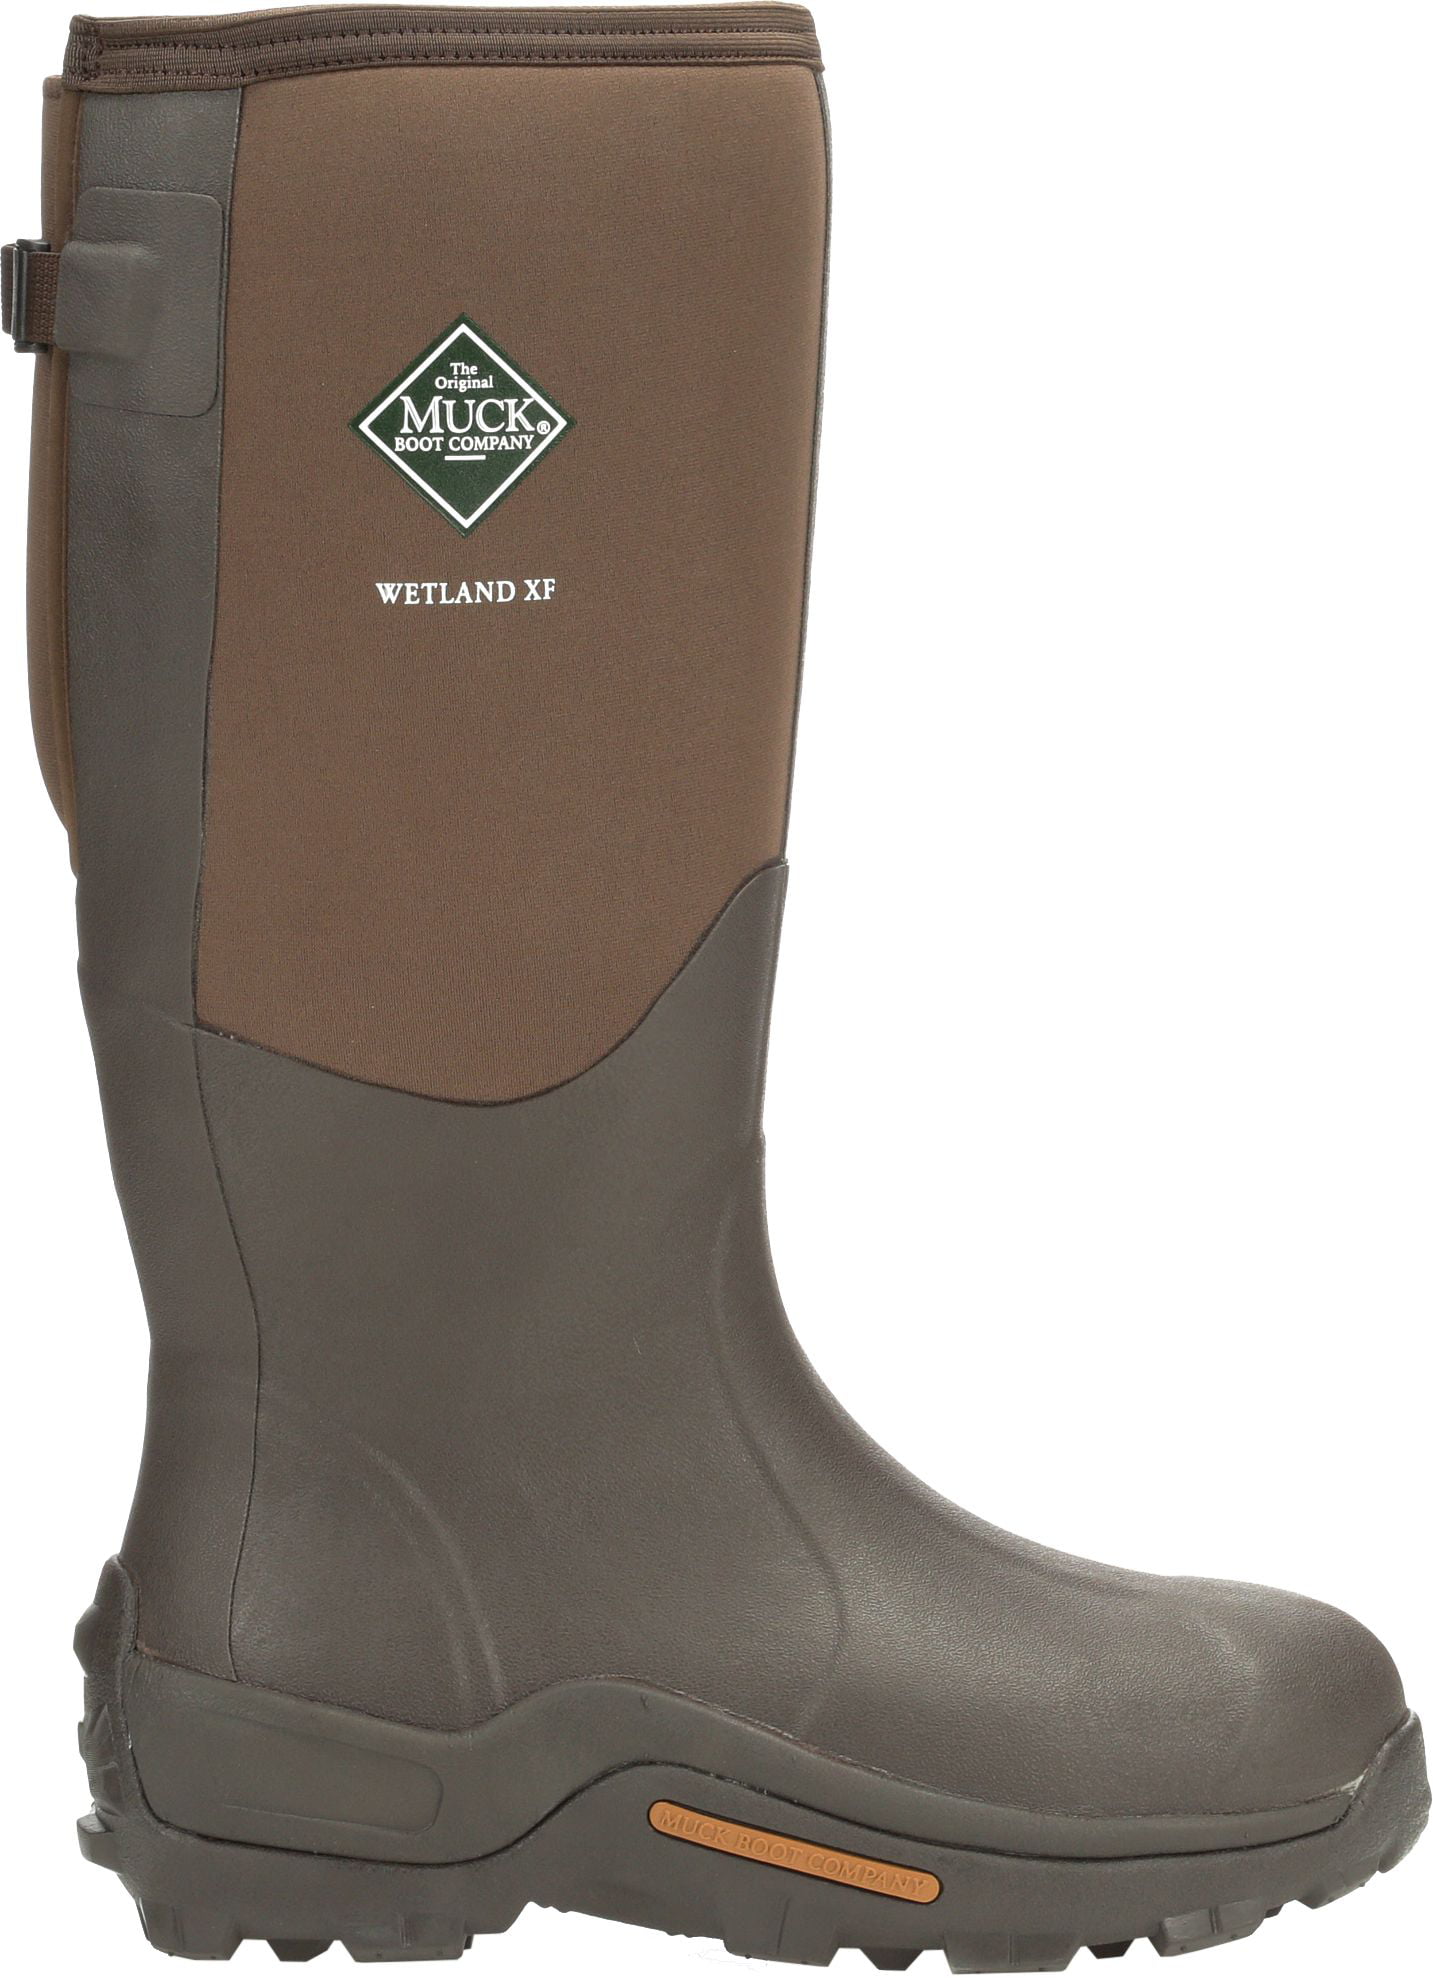 Muck Boot Company - Muck Boots Men's Wetland Wide Calf Rubber Hunting ...